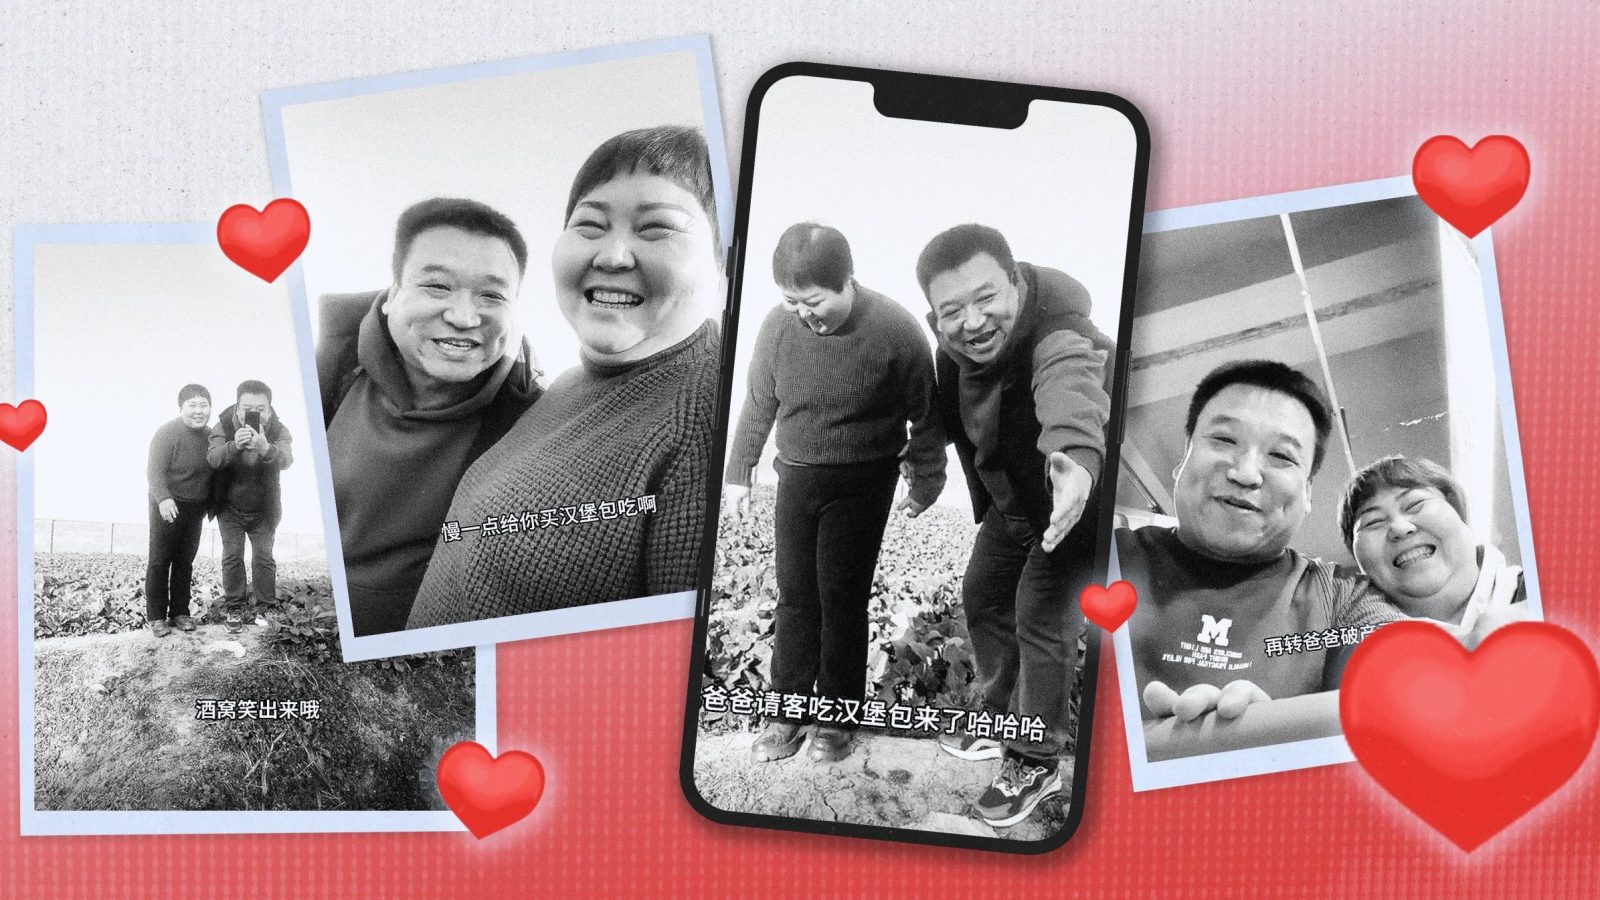 In a video on Douyin, China’s TikTok, a middle-aged couple travel to visit their adult daughter who goes to school in a different city. They surpris